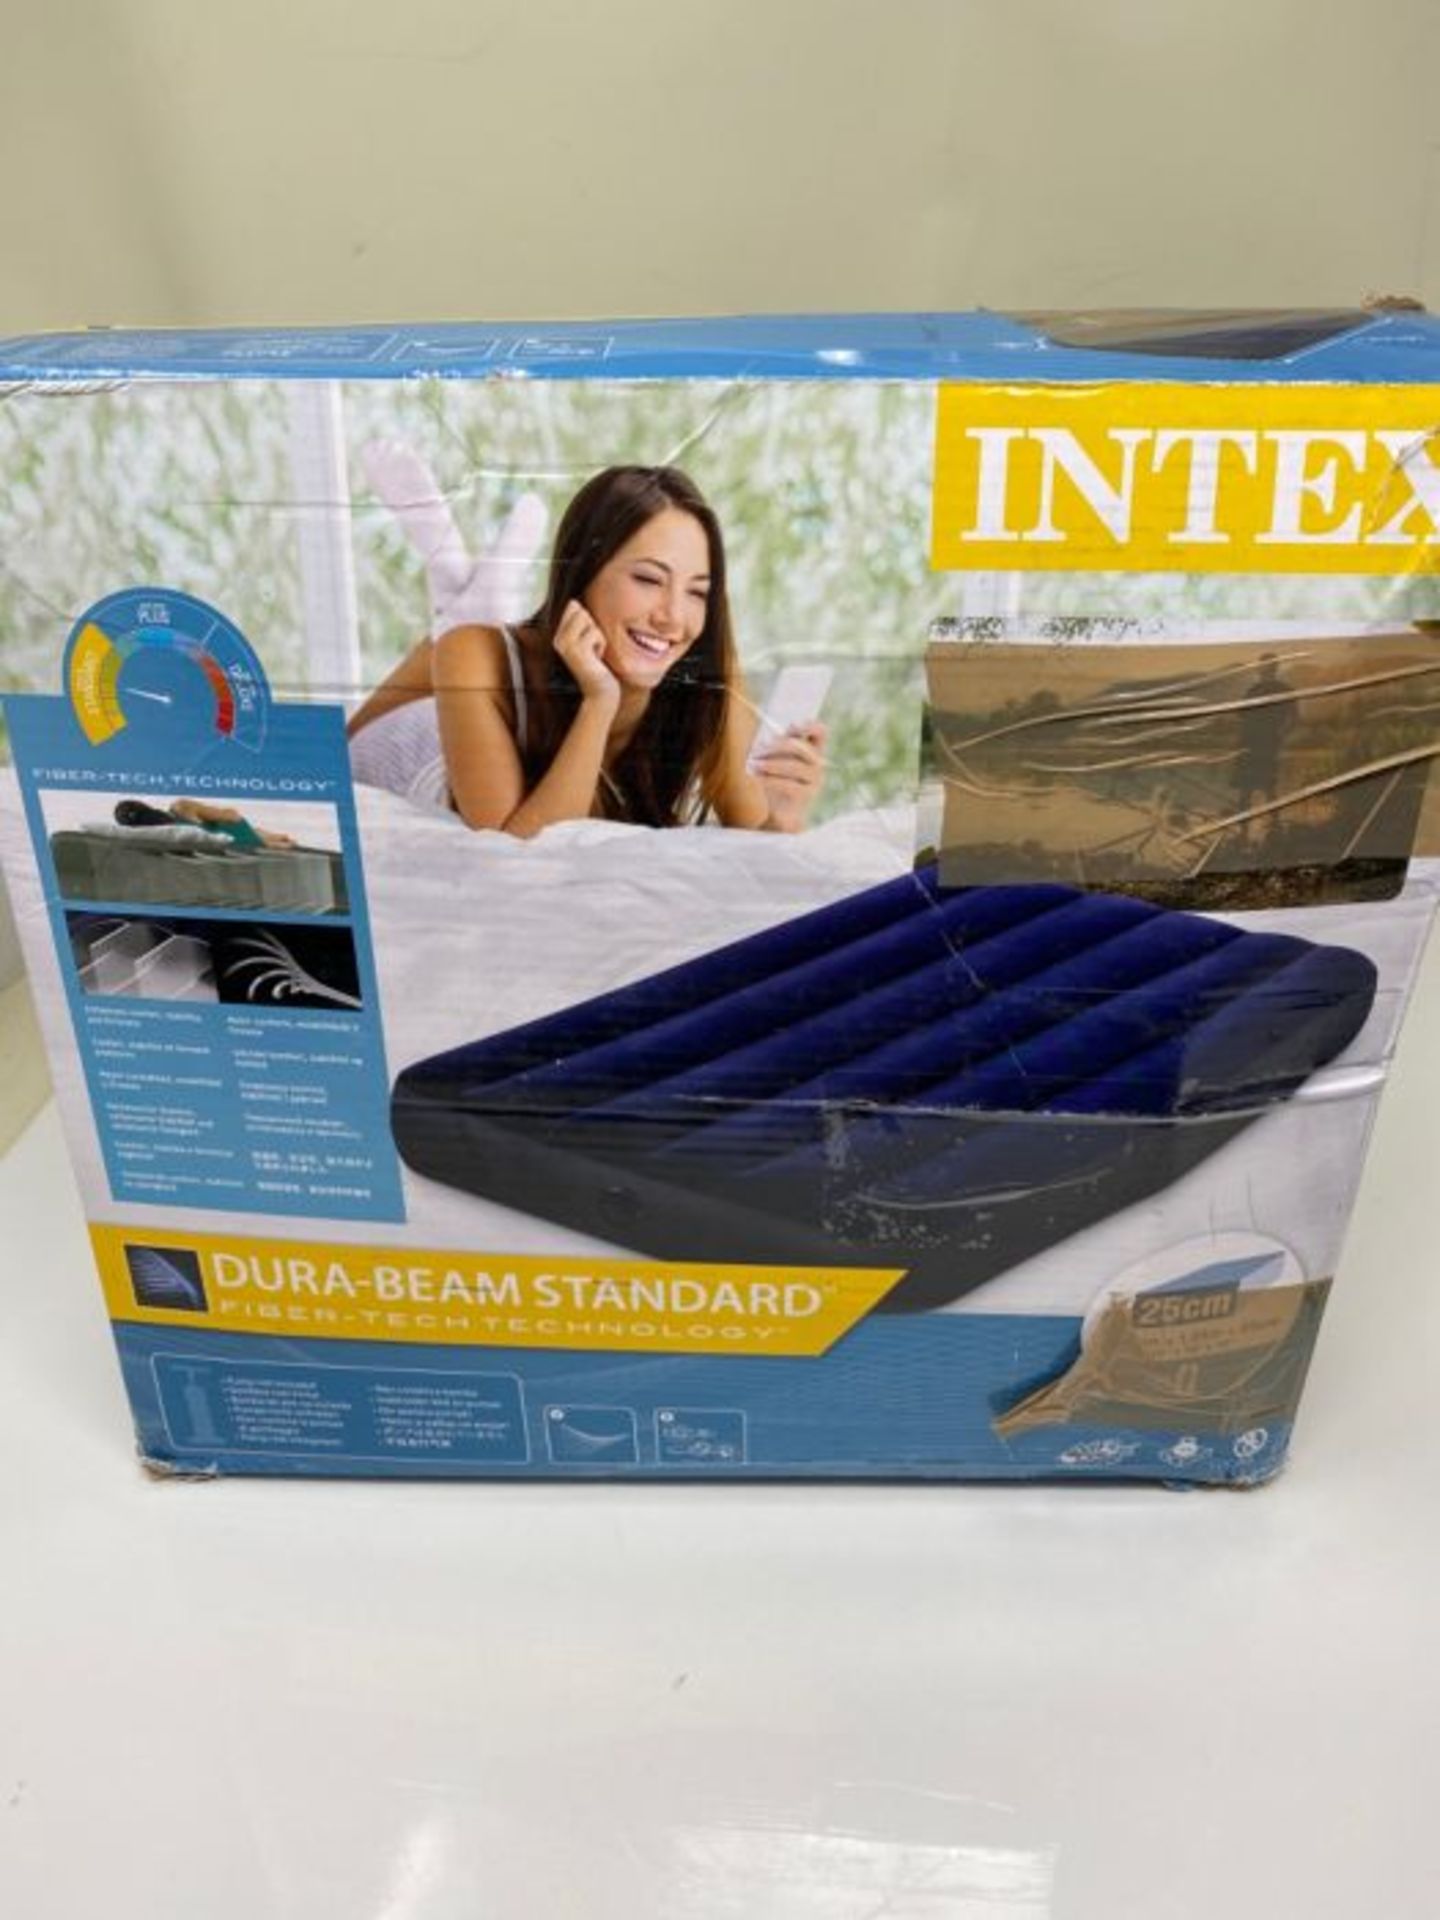 Intex Inflatable Bed, 64757, multicoloured, 99 x 191 x 25 cm - Image 2 of 3